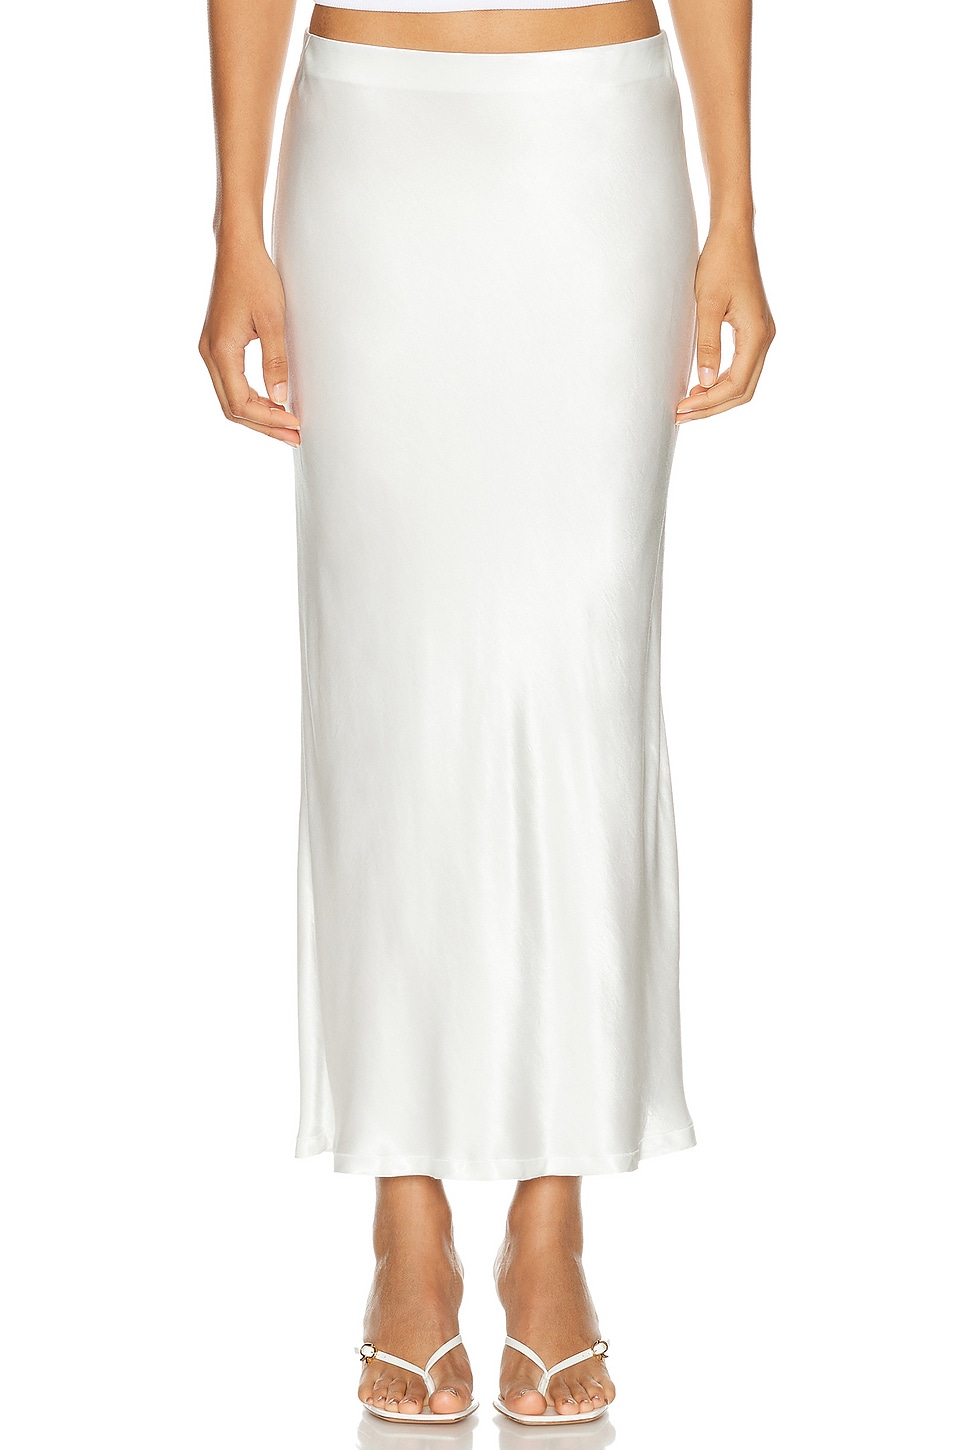 Image 1 of Enza Costa Satin Bias Cut Skirt in Undyed